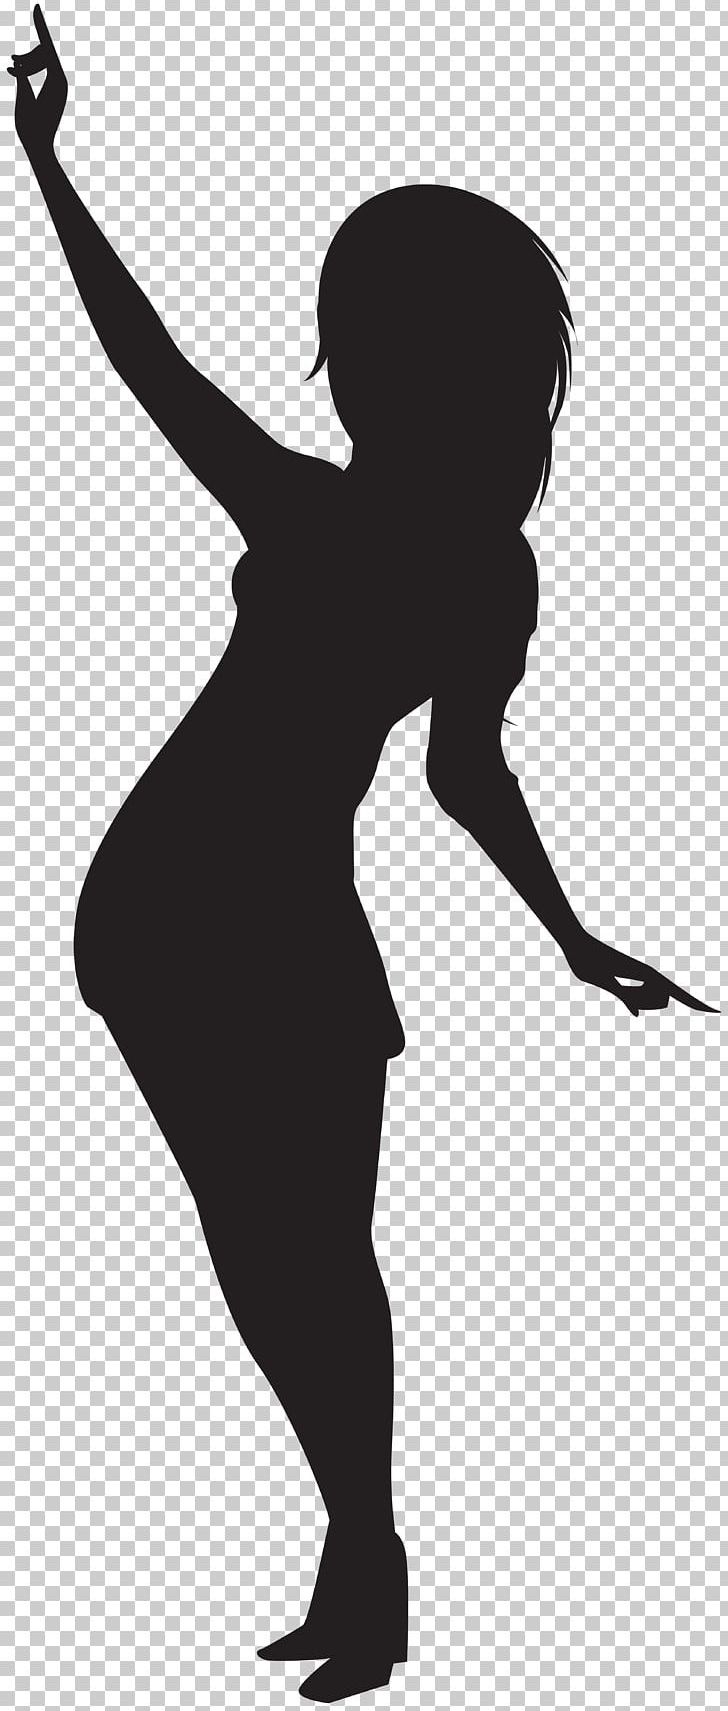 Silhouette Girl Scalable Graphics PNG, Clipart, Arm, Art.